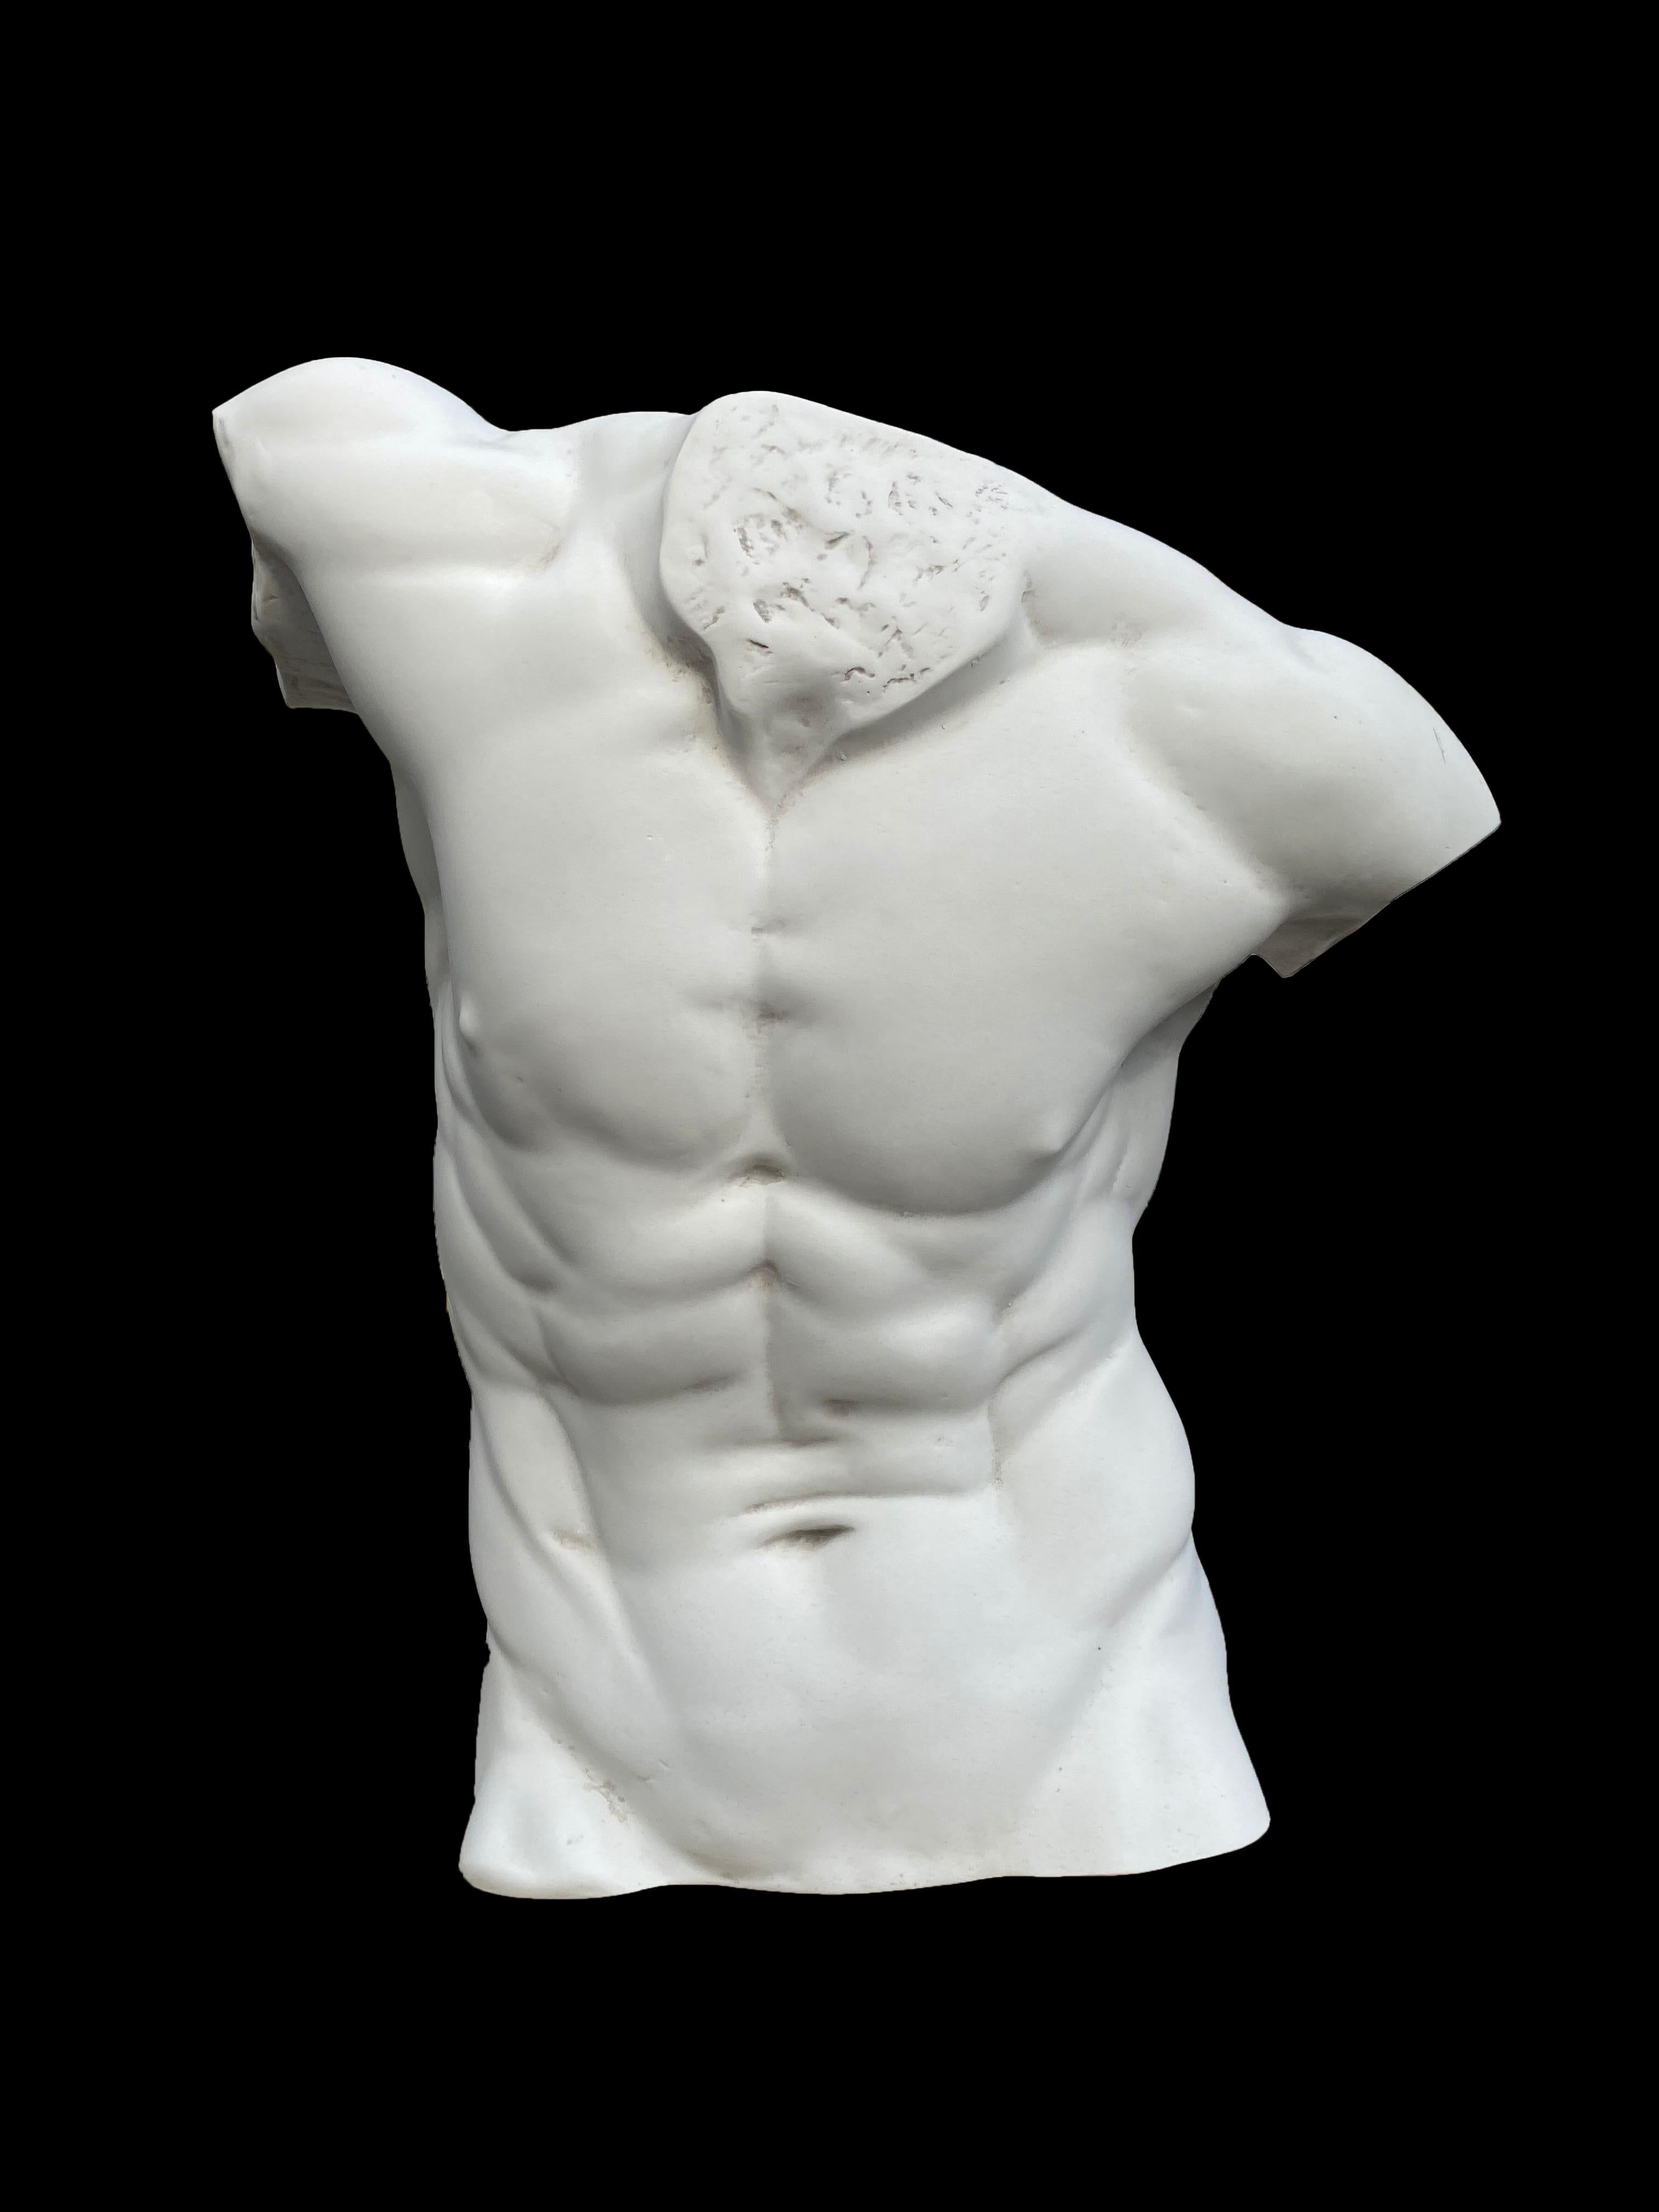 This large male torso statue resembles the classical movement of the famous Laocoön and Belvedere torso in the Vatican Museums.

Stunningly well executed, this marble sculpture of a naked male torso has incredible details at the back and front